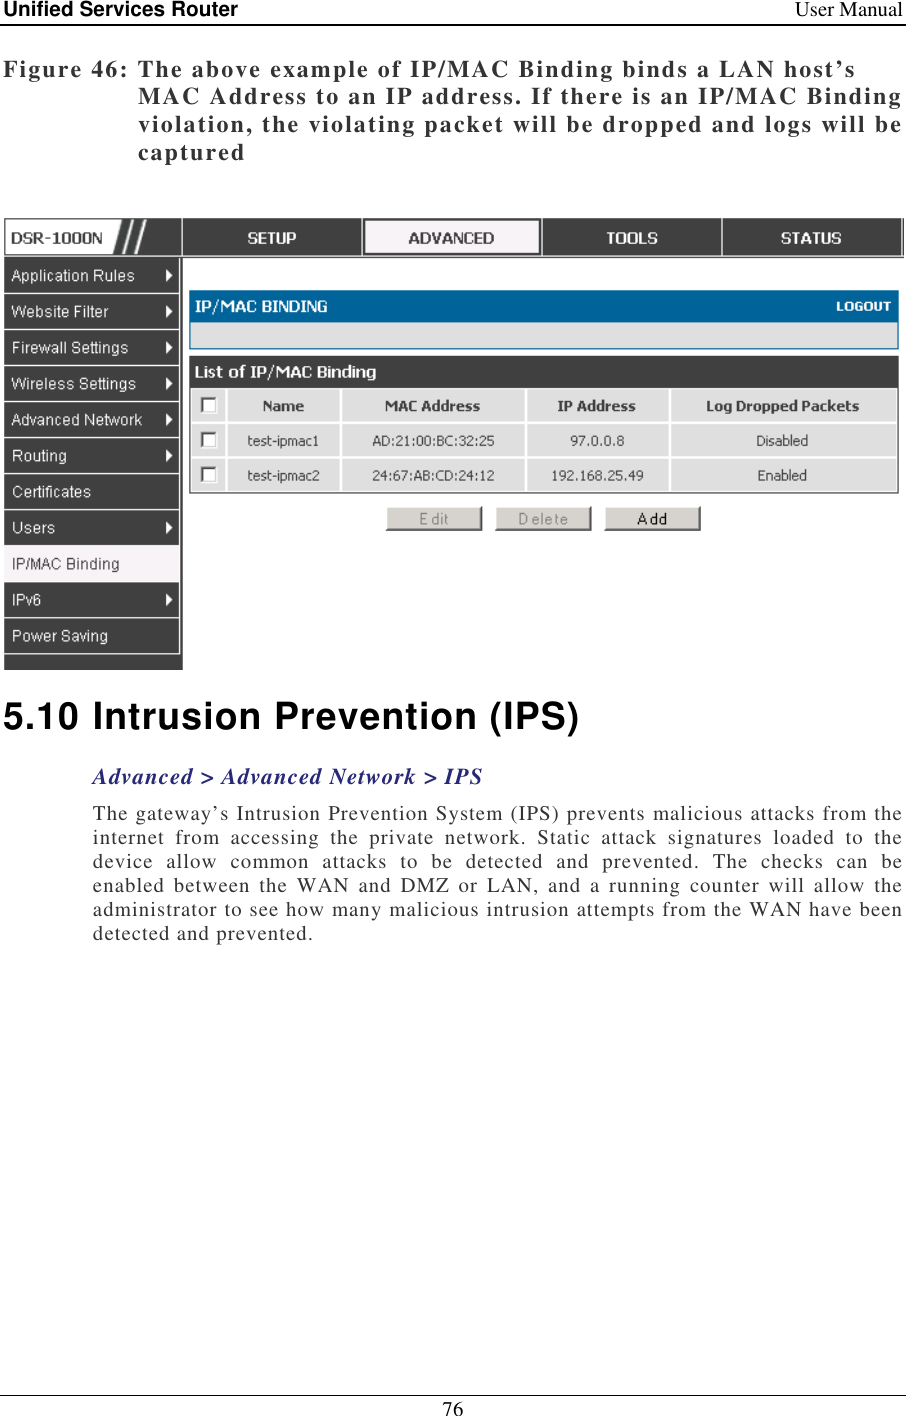 Unified Services Router    User Manual 76  Figure 46: The above example of IP/MAC Binding binds a LAN host’s MAC Address to an IP address. If there is an IP/MAC Binding violation, the violating packet will be dropped and logs will be captured   5.10 Intrusion Prevention (IPS) Advanced &gt; Advanced Network &gt; IPS The gateway’s Intrusion Prevention System (IPS) prevents malicious attacks from the internet  from  accessing  the  private  network.  Static  attack  signatures  loaded  to  the device  allow  common  attacks  to  be  detected  and  prevented.  The  checks  can  be enabled  between  the  WAN  and  DMZ  or  LAN,  and  a  running  counter  will  allow  the administrator to see how many malicious intrusion attempts from the WAN have been detected and prevented.  